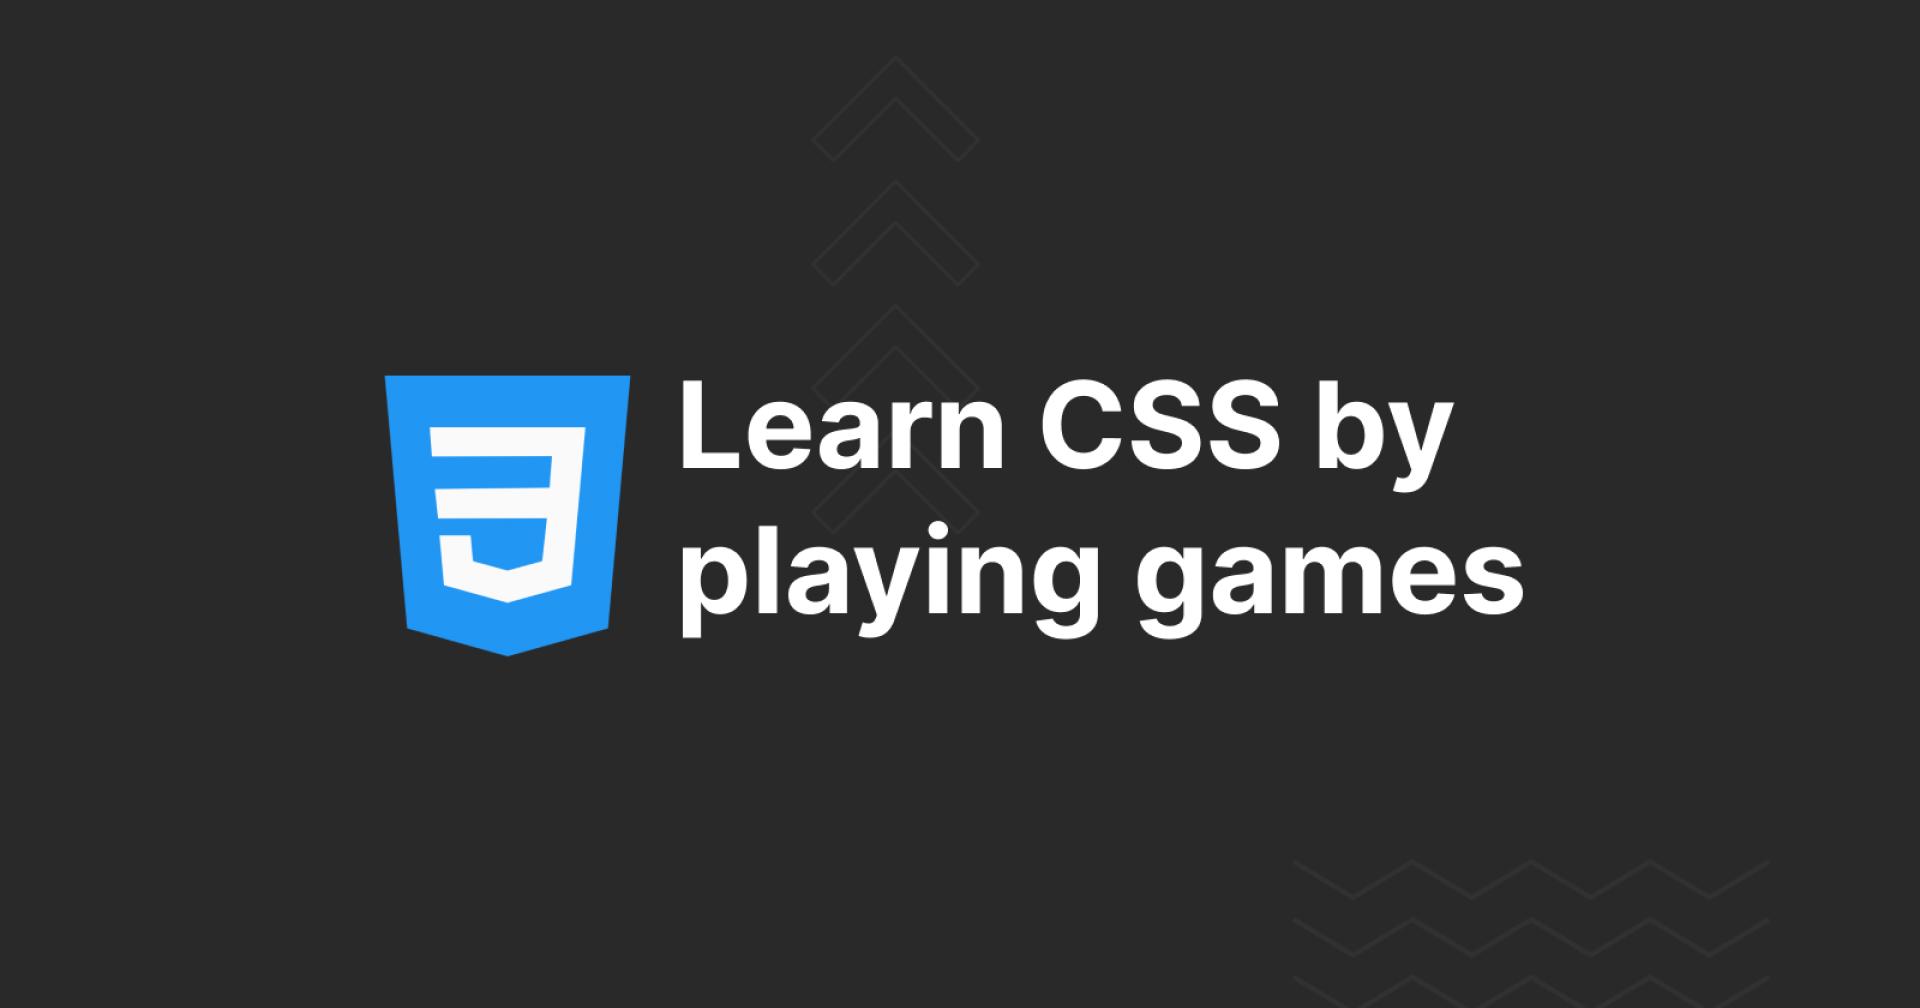 Learn CSS by playing games